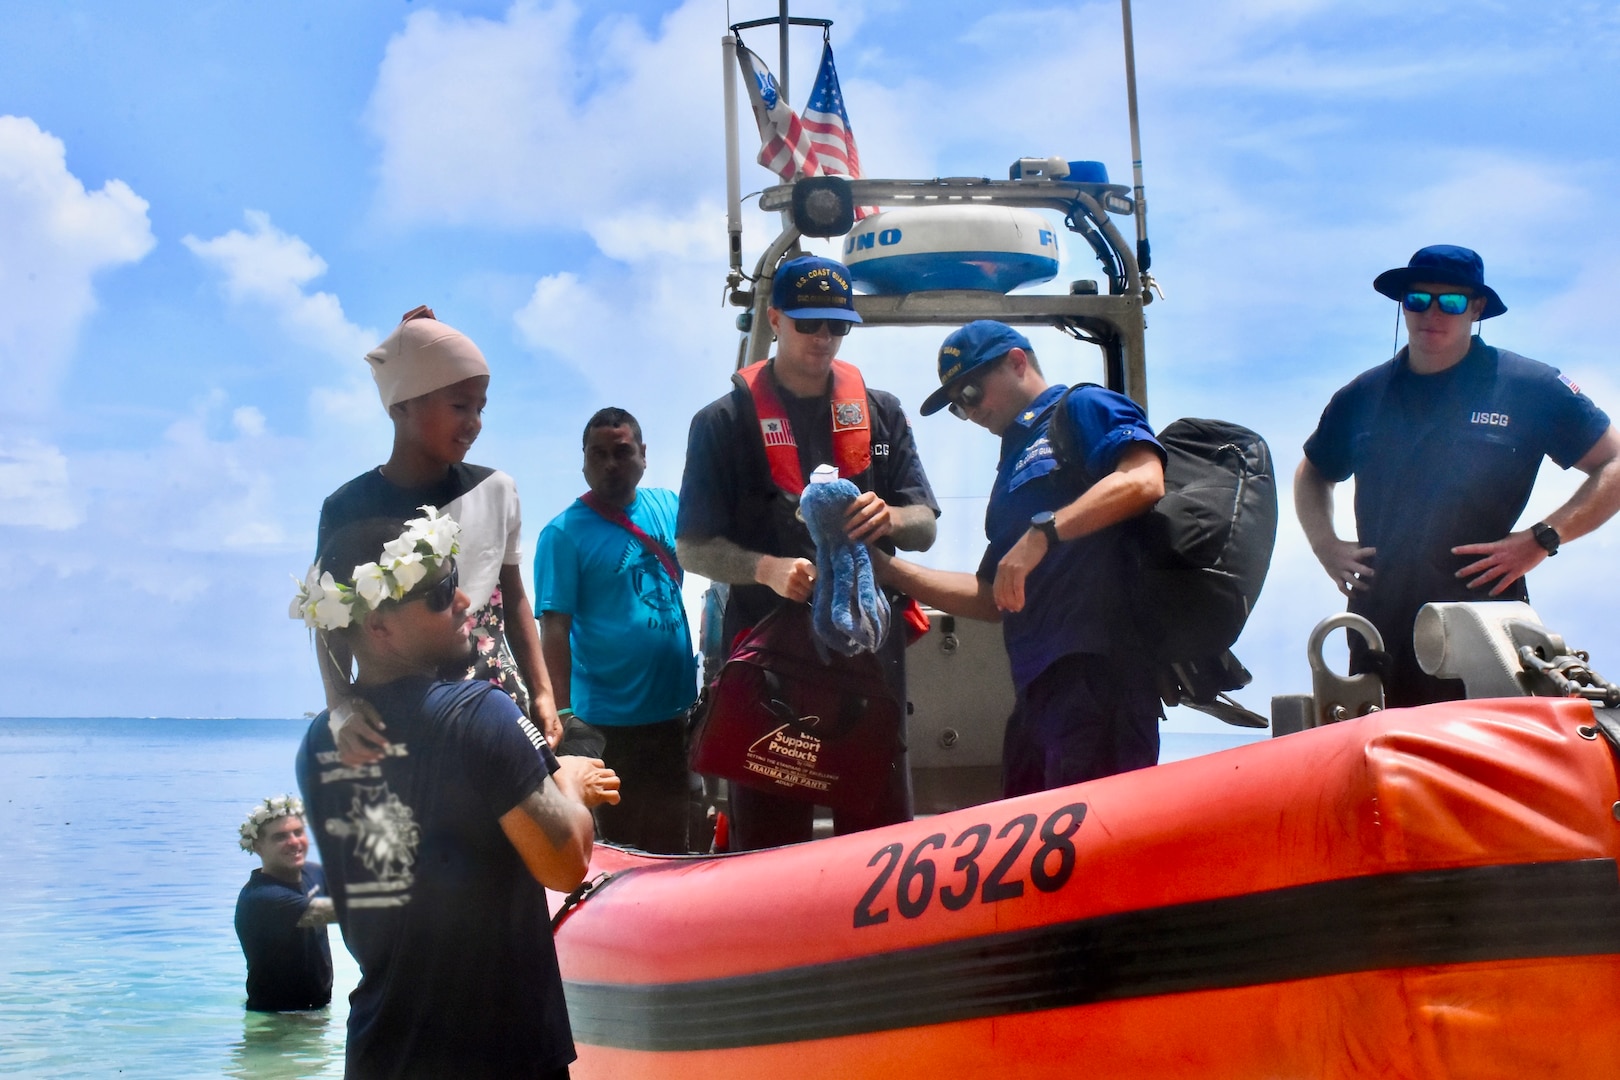 The crew of USCGC Oliver Henry (WPC 1140) arrive to Woleai, Yap State, Federated States of Micronesia, on April 12, 2024, with an injured 9-year-old boy and his parents for further transport aboard a Pacific Mission Aviation flight to a higher level of medical care in Yap. Upon arriving to Satawal to deliver drought relief supplies in partnership with USAID and the International Organization for Migration (IOM), the U.S. Coast Guard crew was informed of the boy's injury sustained when he fell from a tree. The ship's EMT, Petty Officer 1st Class Joshua Pablo, consulted a U.S. Coast Guard flight surgeon who recommended the medevac and provided care throughout the more than 13-hour overnight transit. This effort showcases the humanitarian spirit and readiness of the U.S. Coast Guard to respond to emergent health concerns. (U.S. Coast Guard photo)